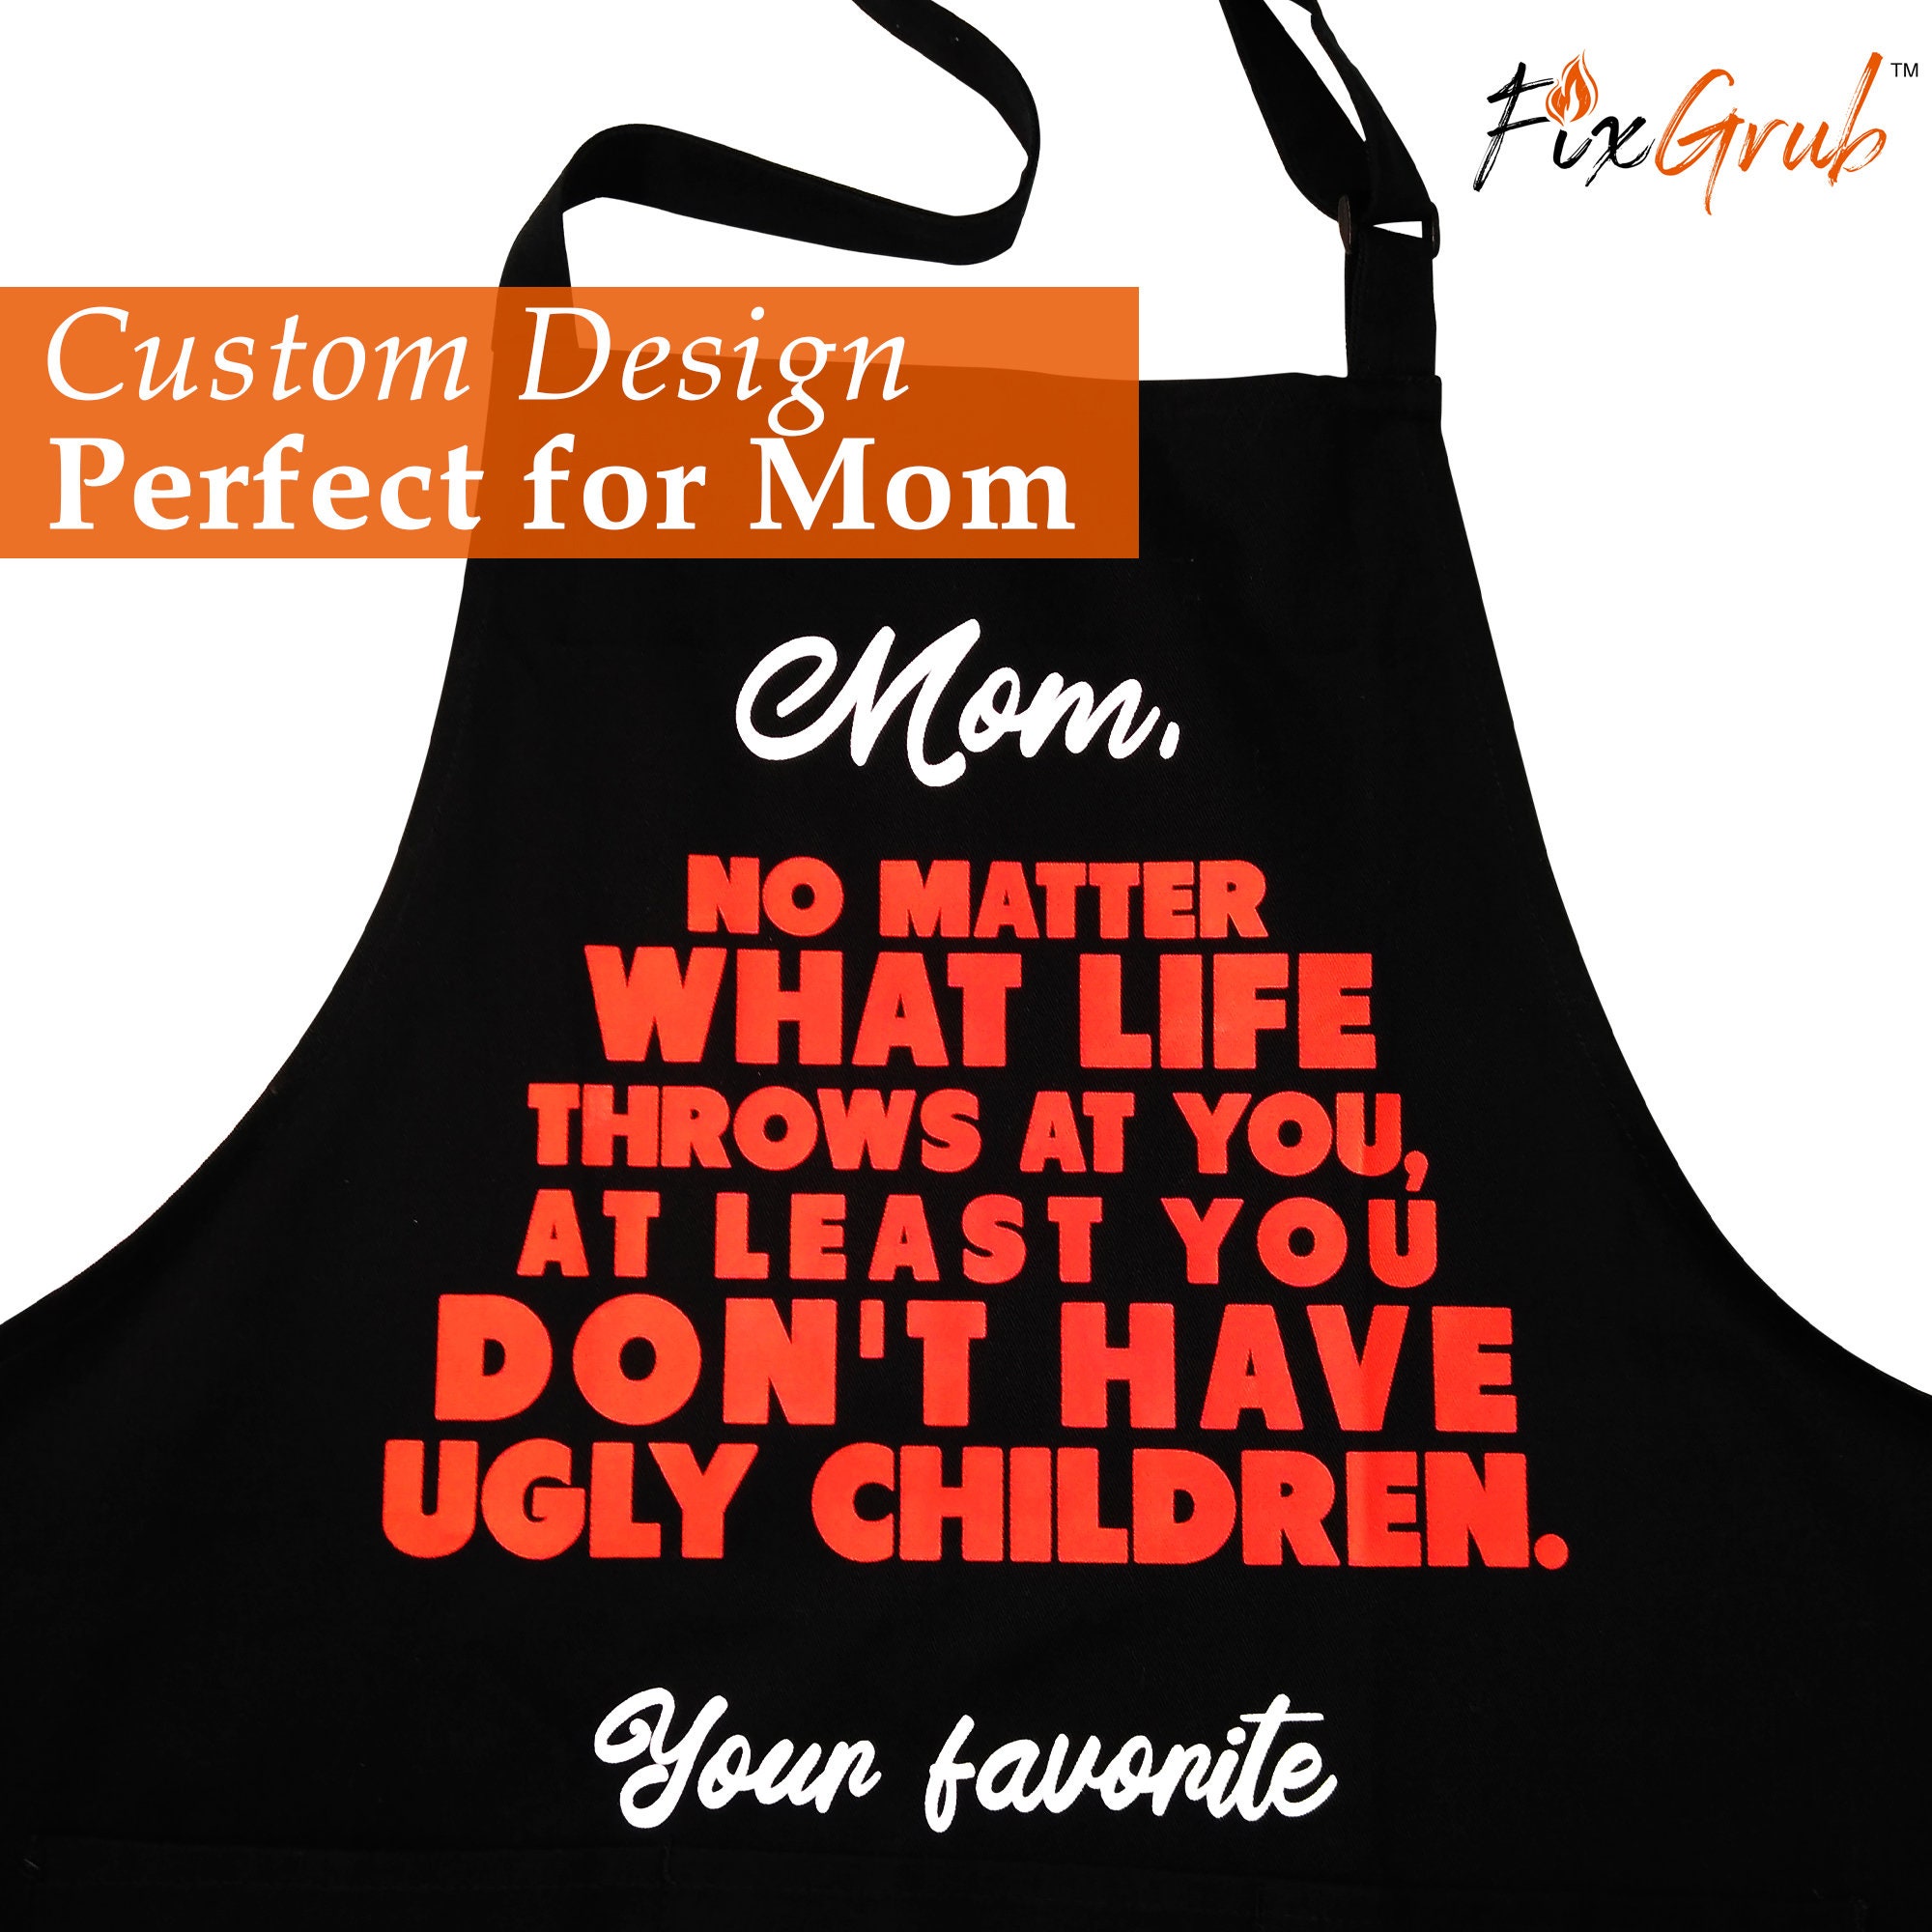 Funny Kitchen Apron for Women Cooking Apron With Pockets Party Apron Baking  Gifts for Her Cute Apron for Mom Full Apron Mothers Day SA1397 